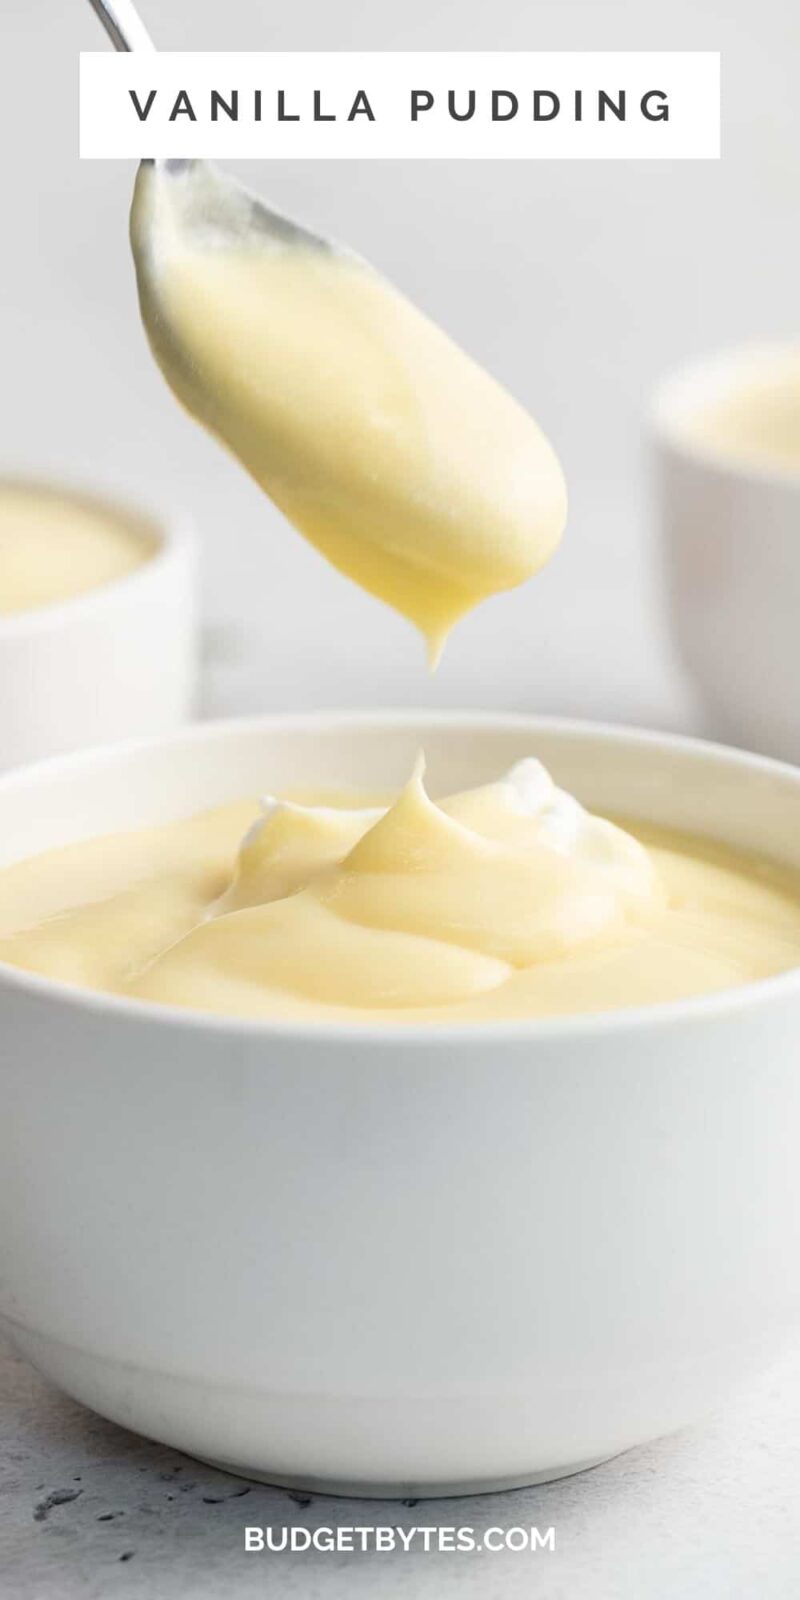 Side shot of vanilla pudding in a white bowl with a spoon coming out of it.